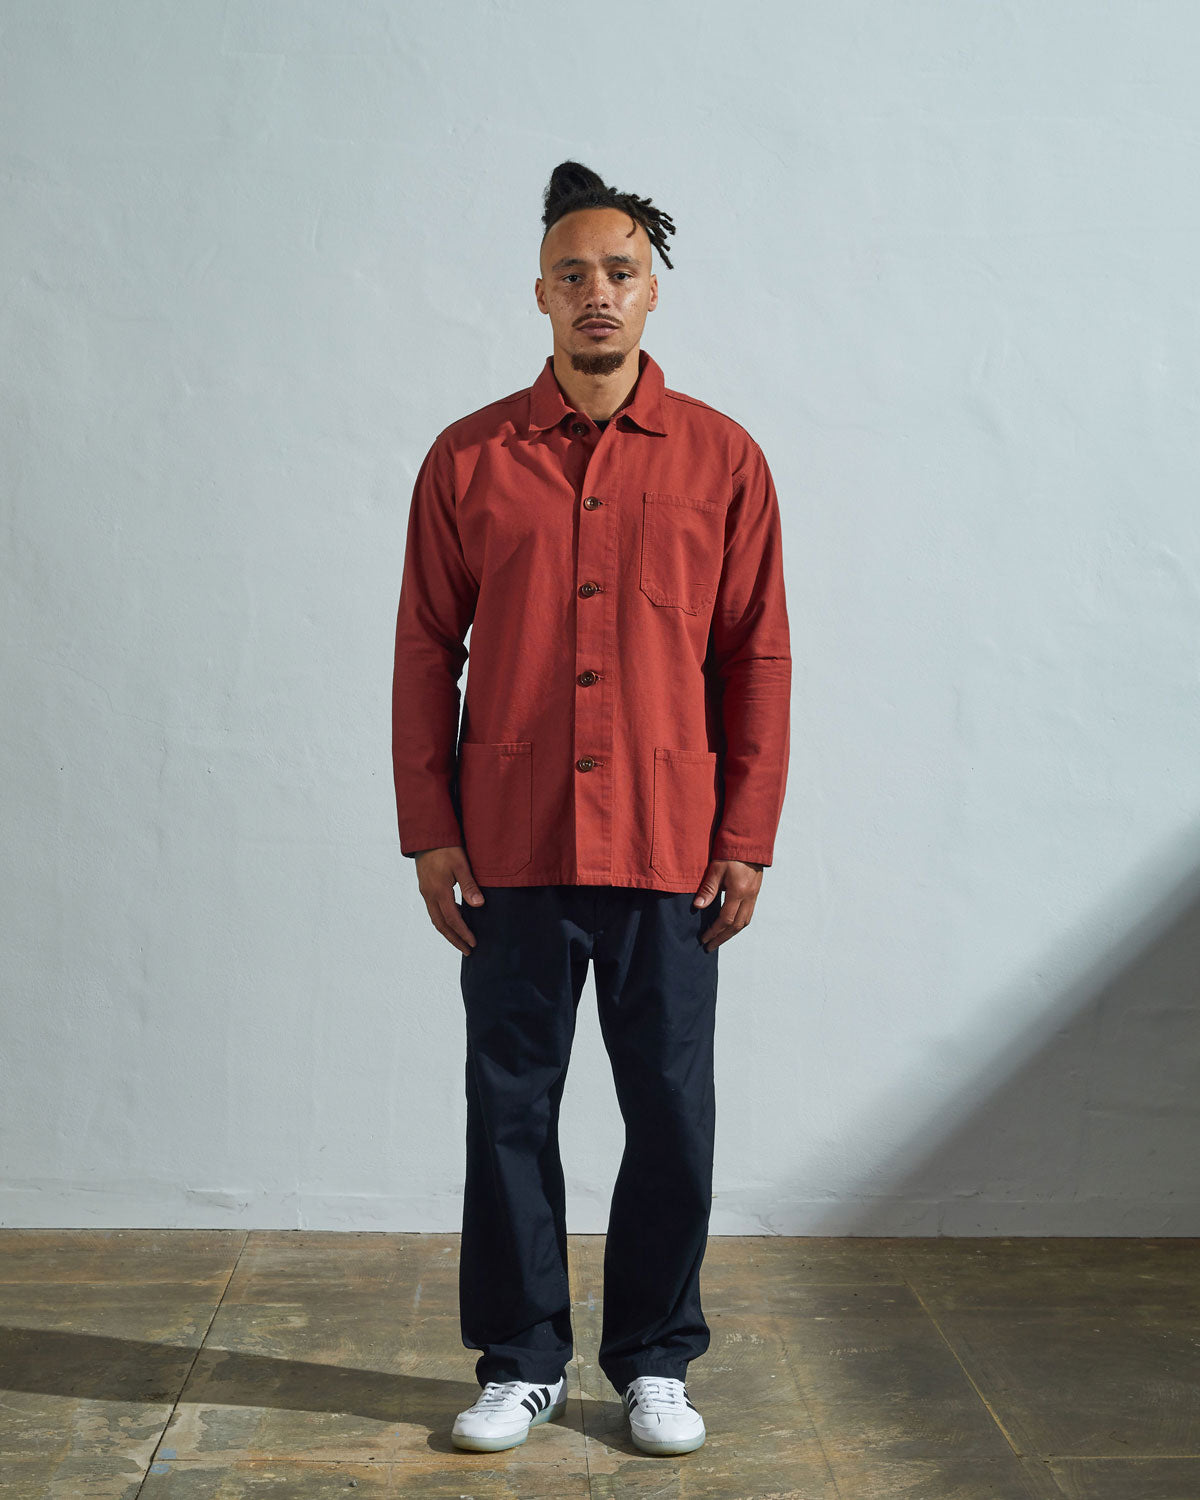 Full-length frontal view of model wearing #3001, terracotta red overshirt paired with dark blue jeans.